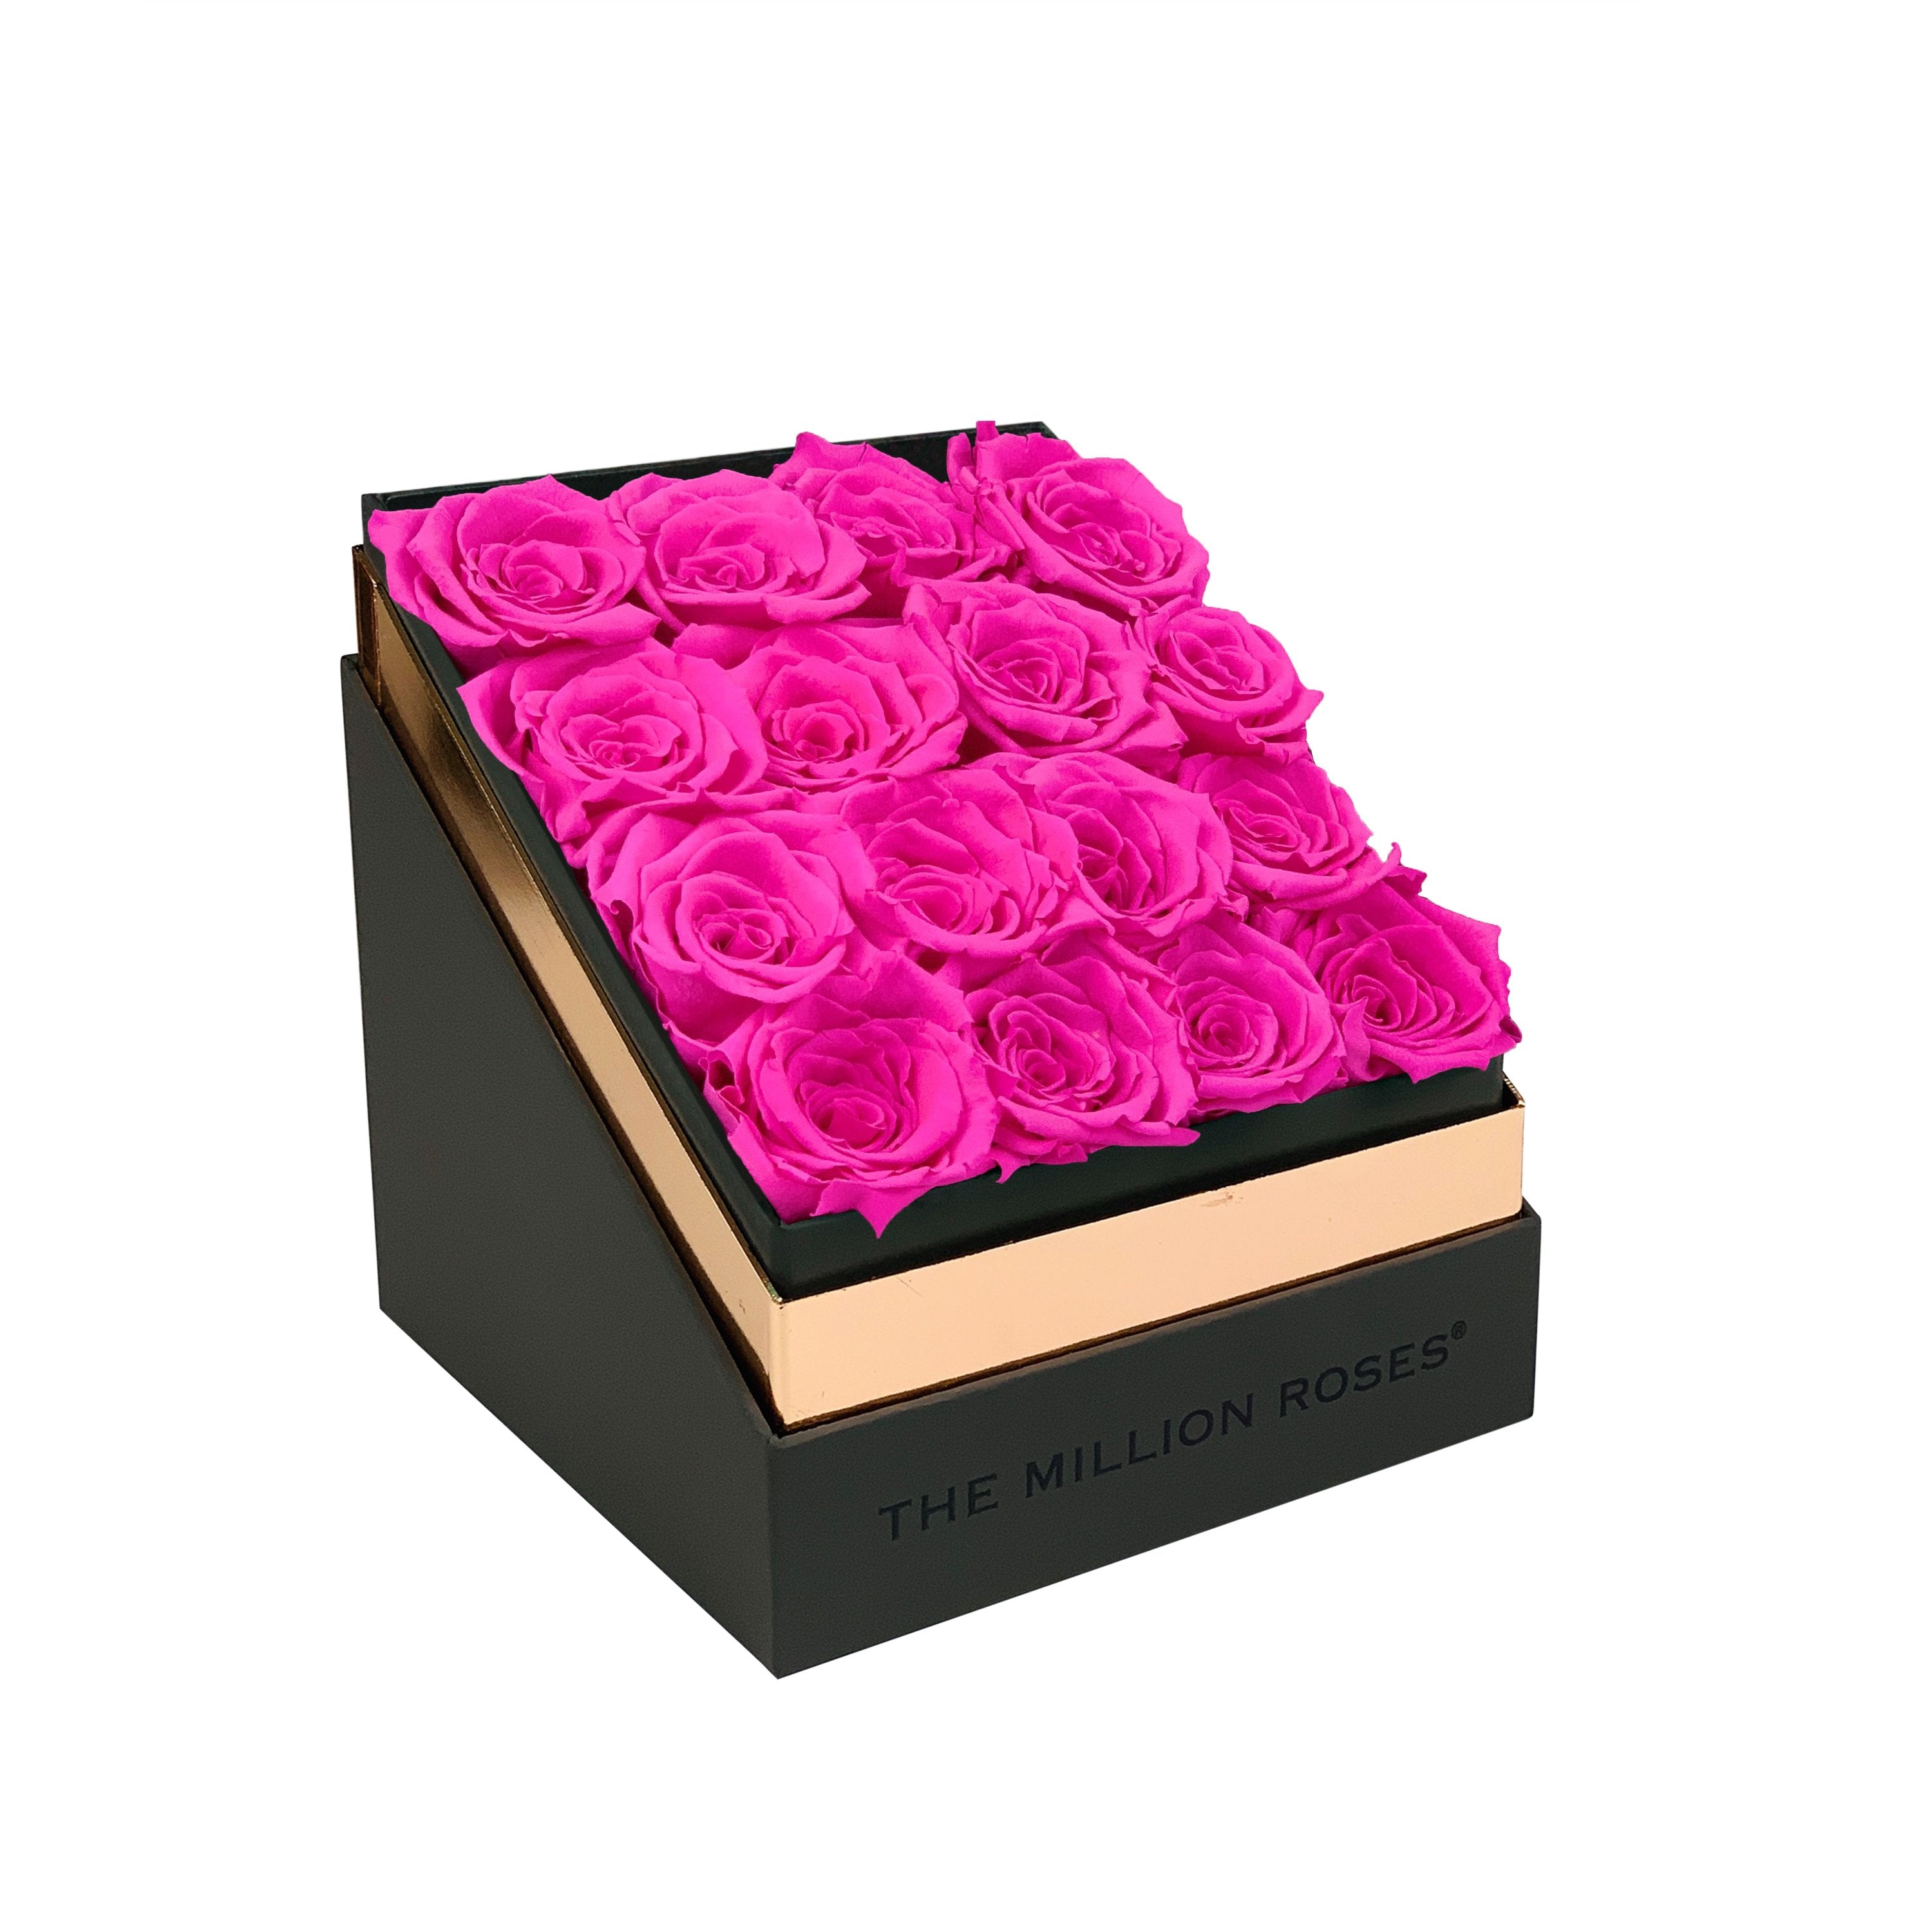 The Square - Gray Box - Neon Pink Roses